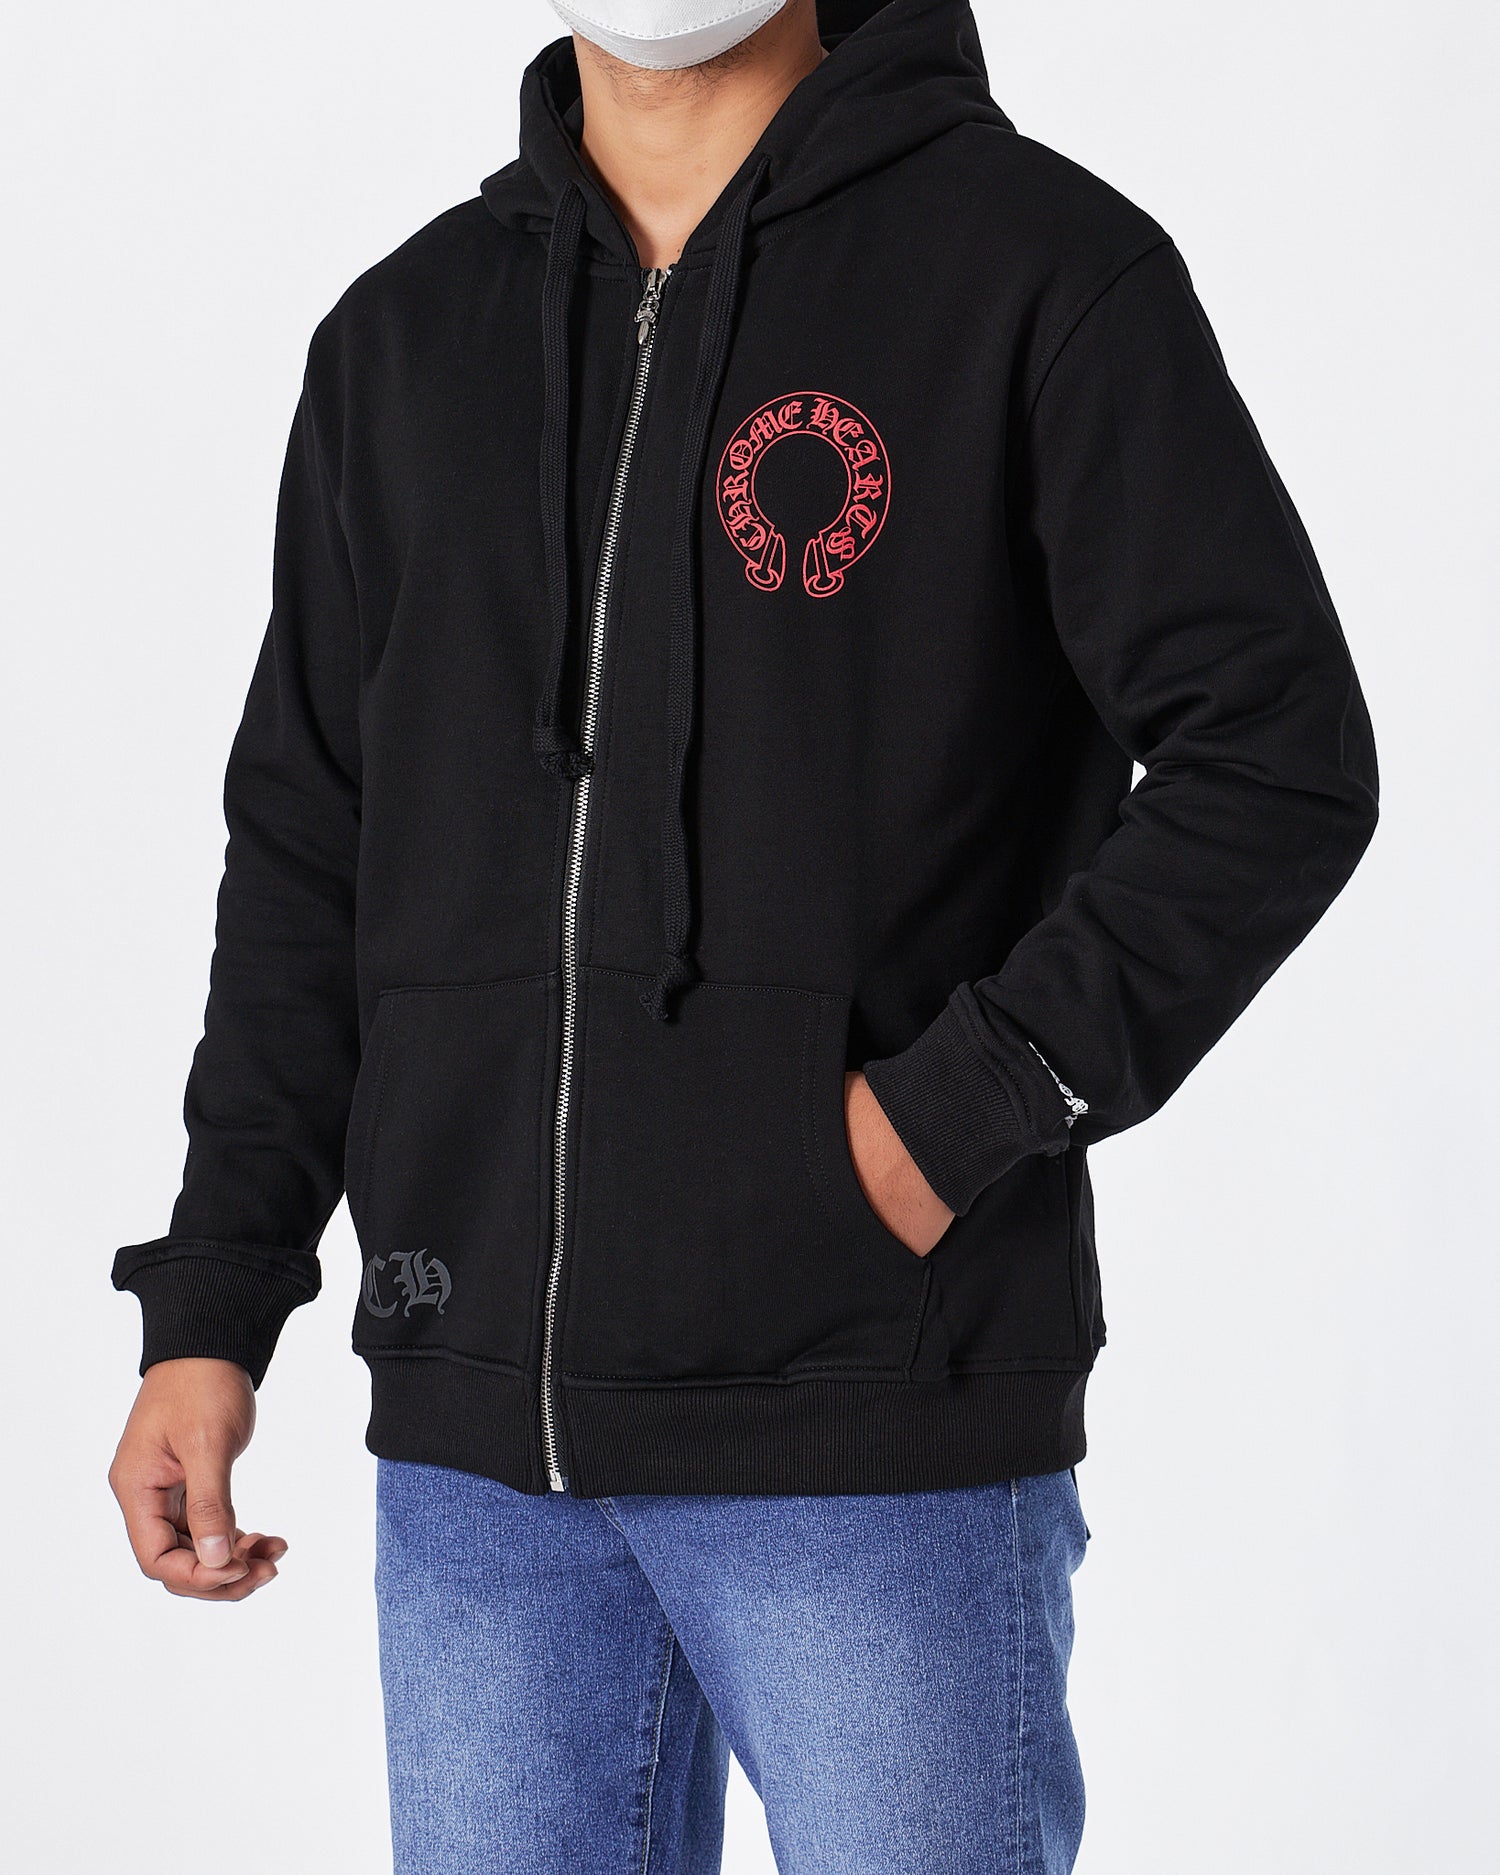 CH Front And Back Logo Printed Men Black Hoodie 39.90